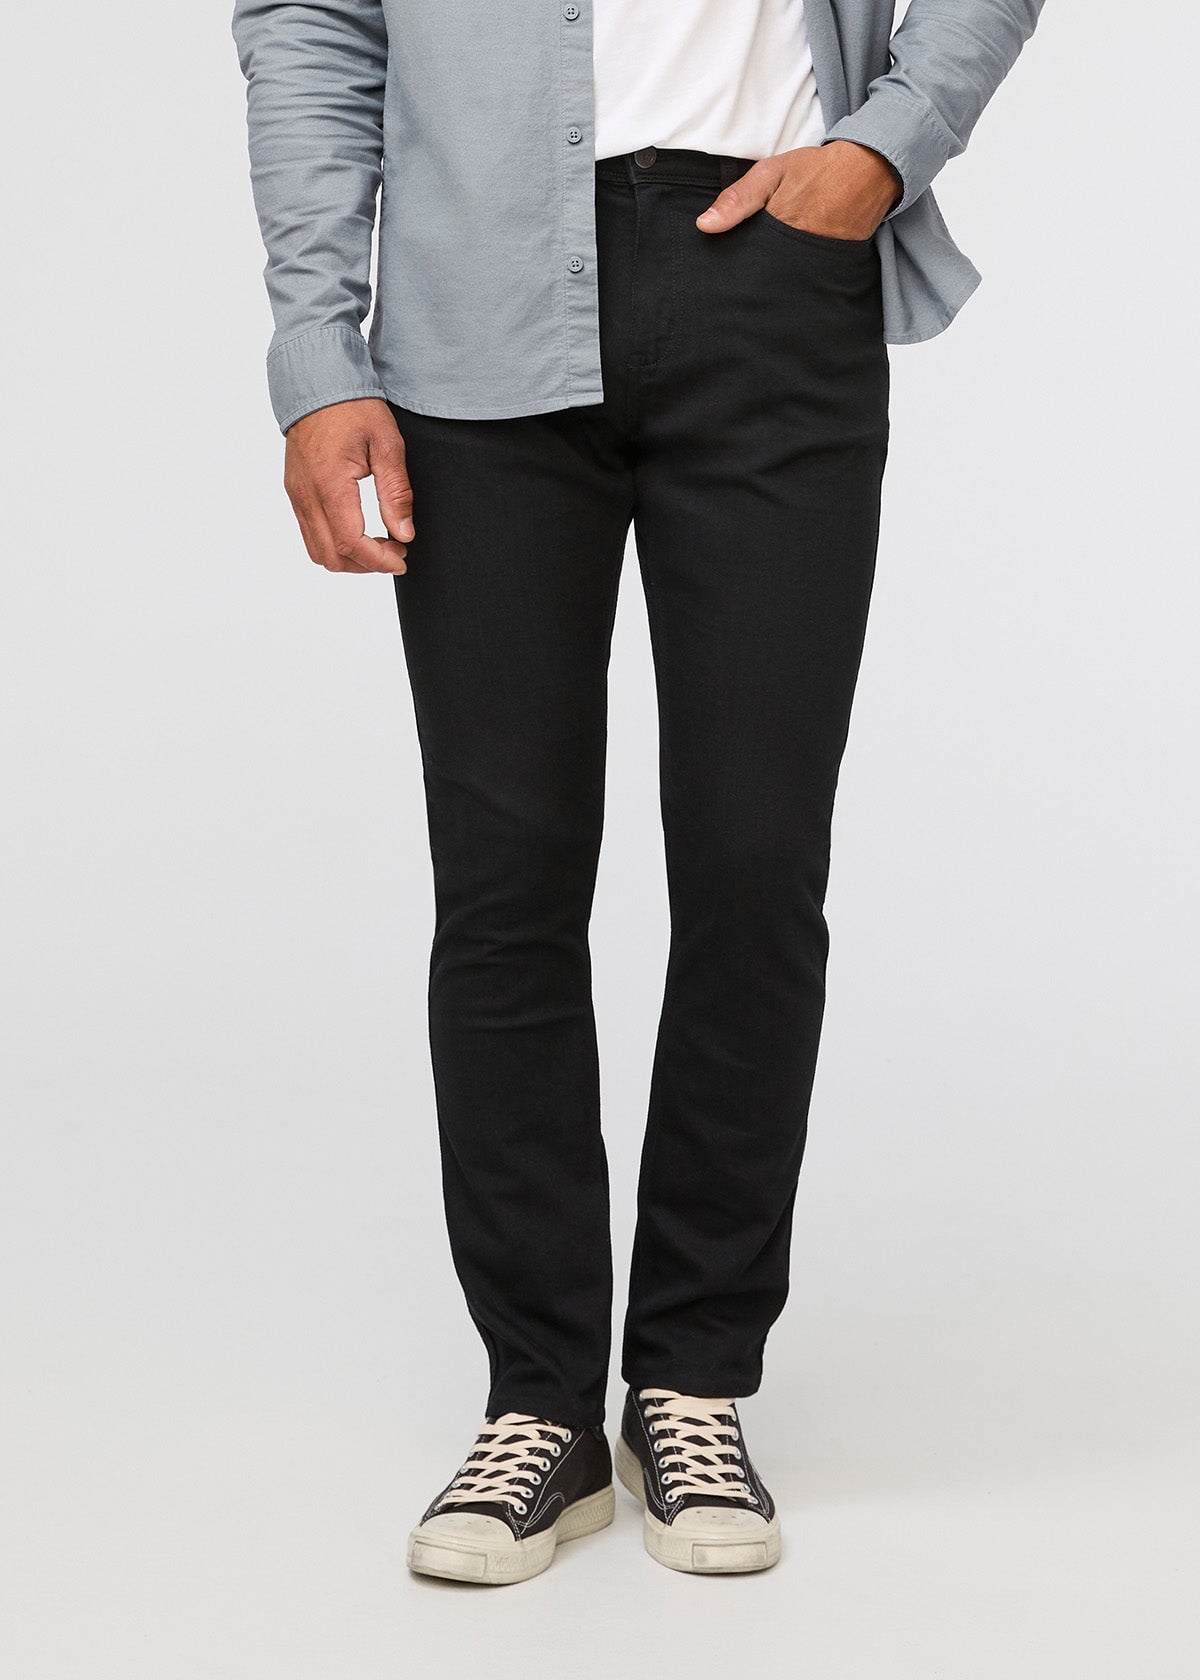 Barkers Mens Clothing | Shirts, Suits, Pants, Shoes & Accessories